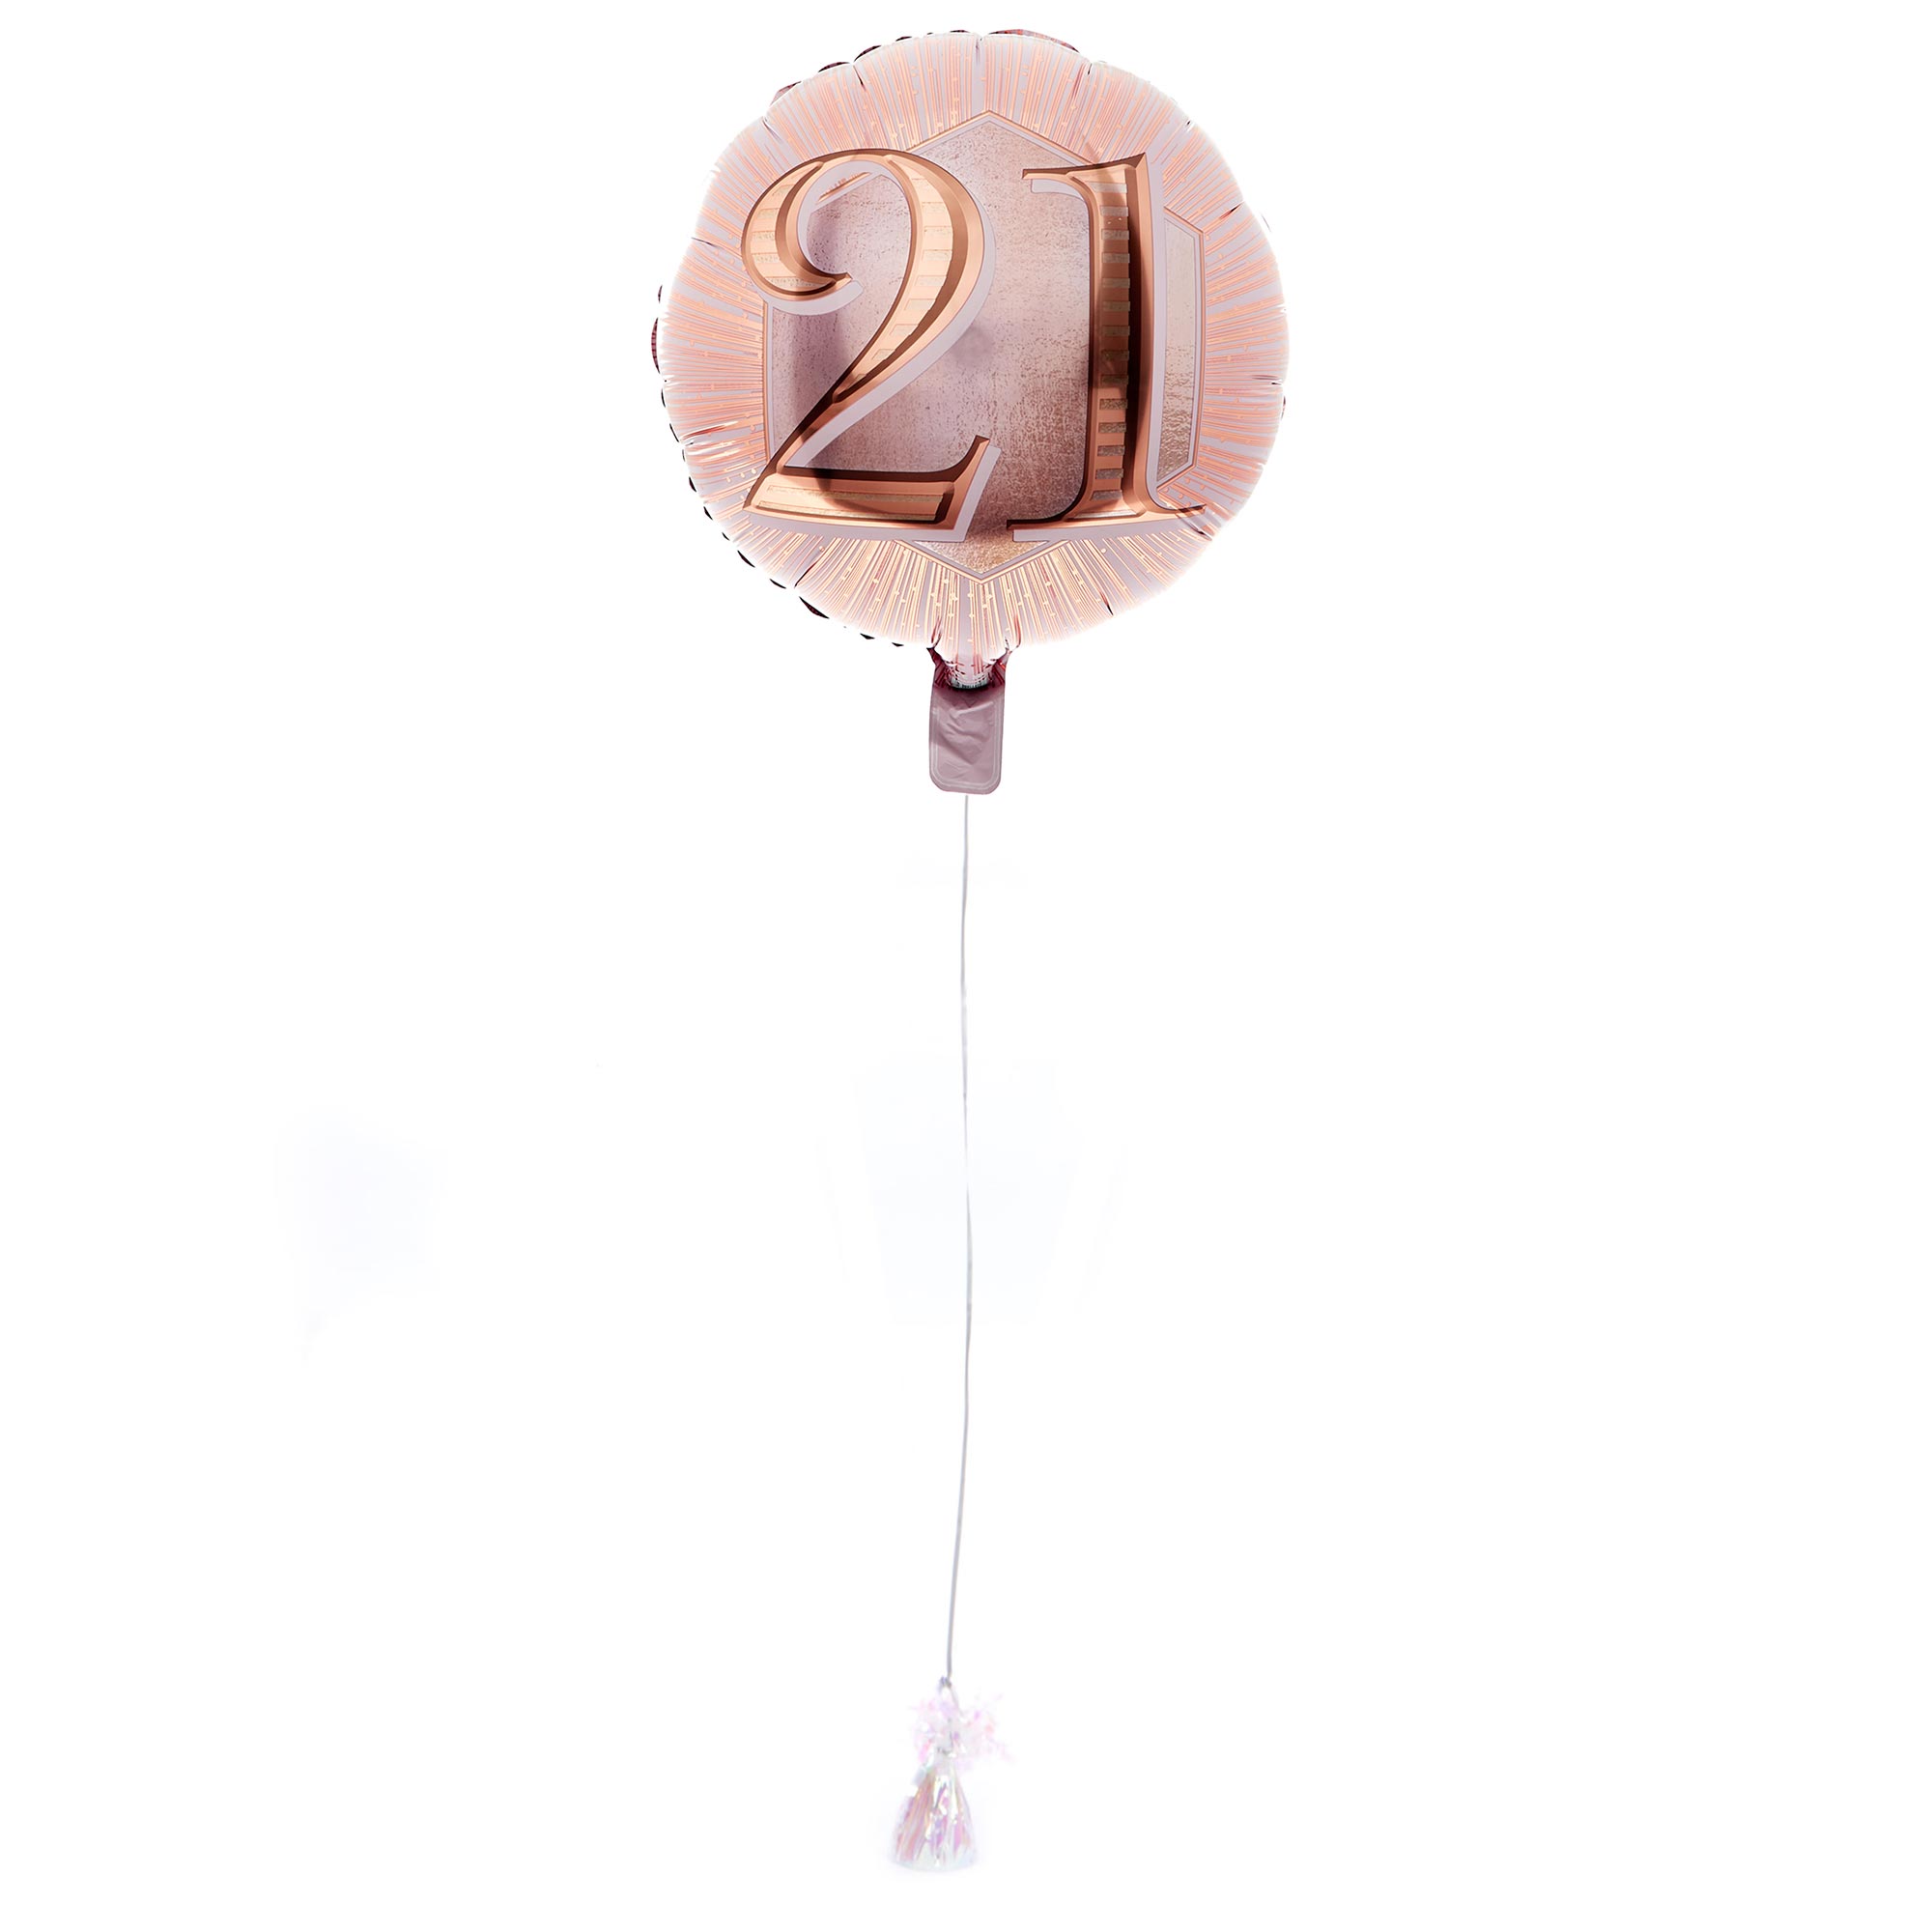 Rose Gold 21st Birthday Balloon & Lindt Chocolate Box - FREE GIFT CARD!